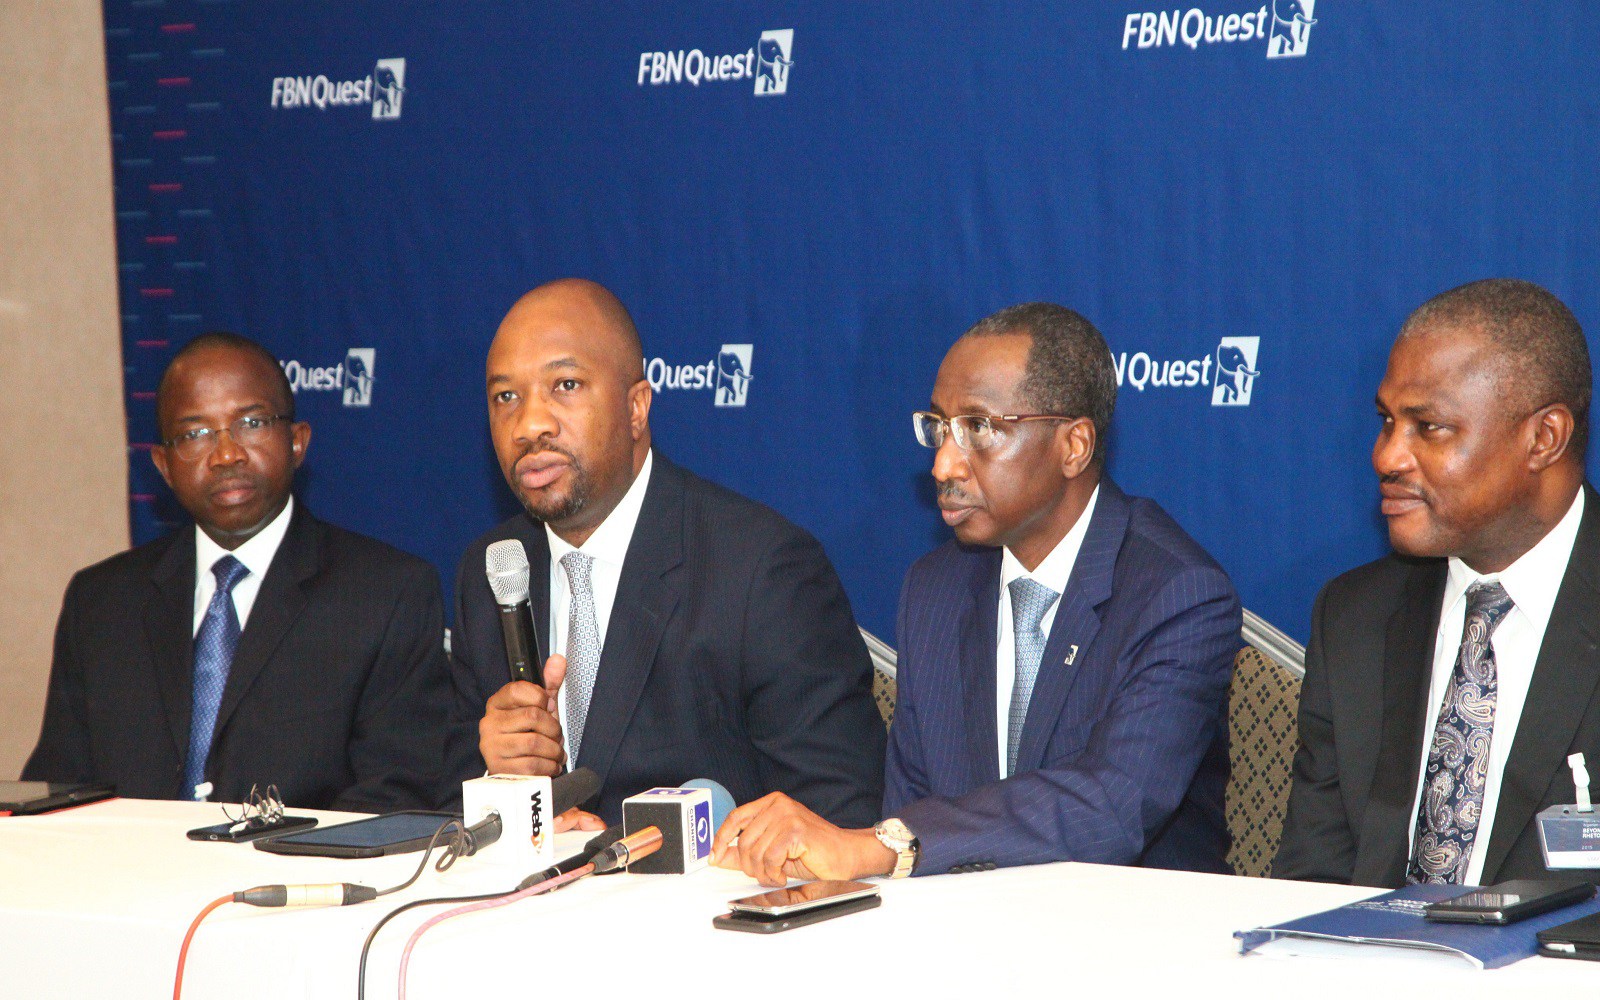 FBNQuest Merchant Bank leads listings by introduction of Notice chemical industries Place on the Nigerian Stock Exchange